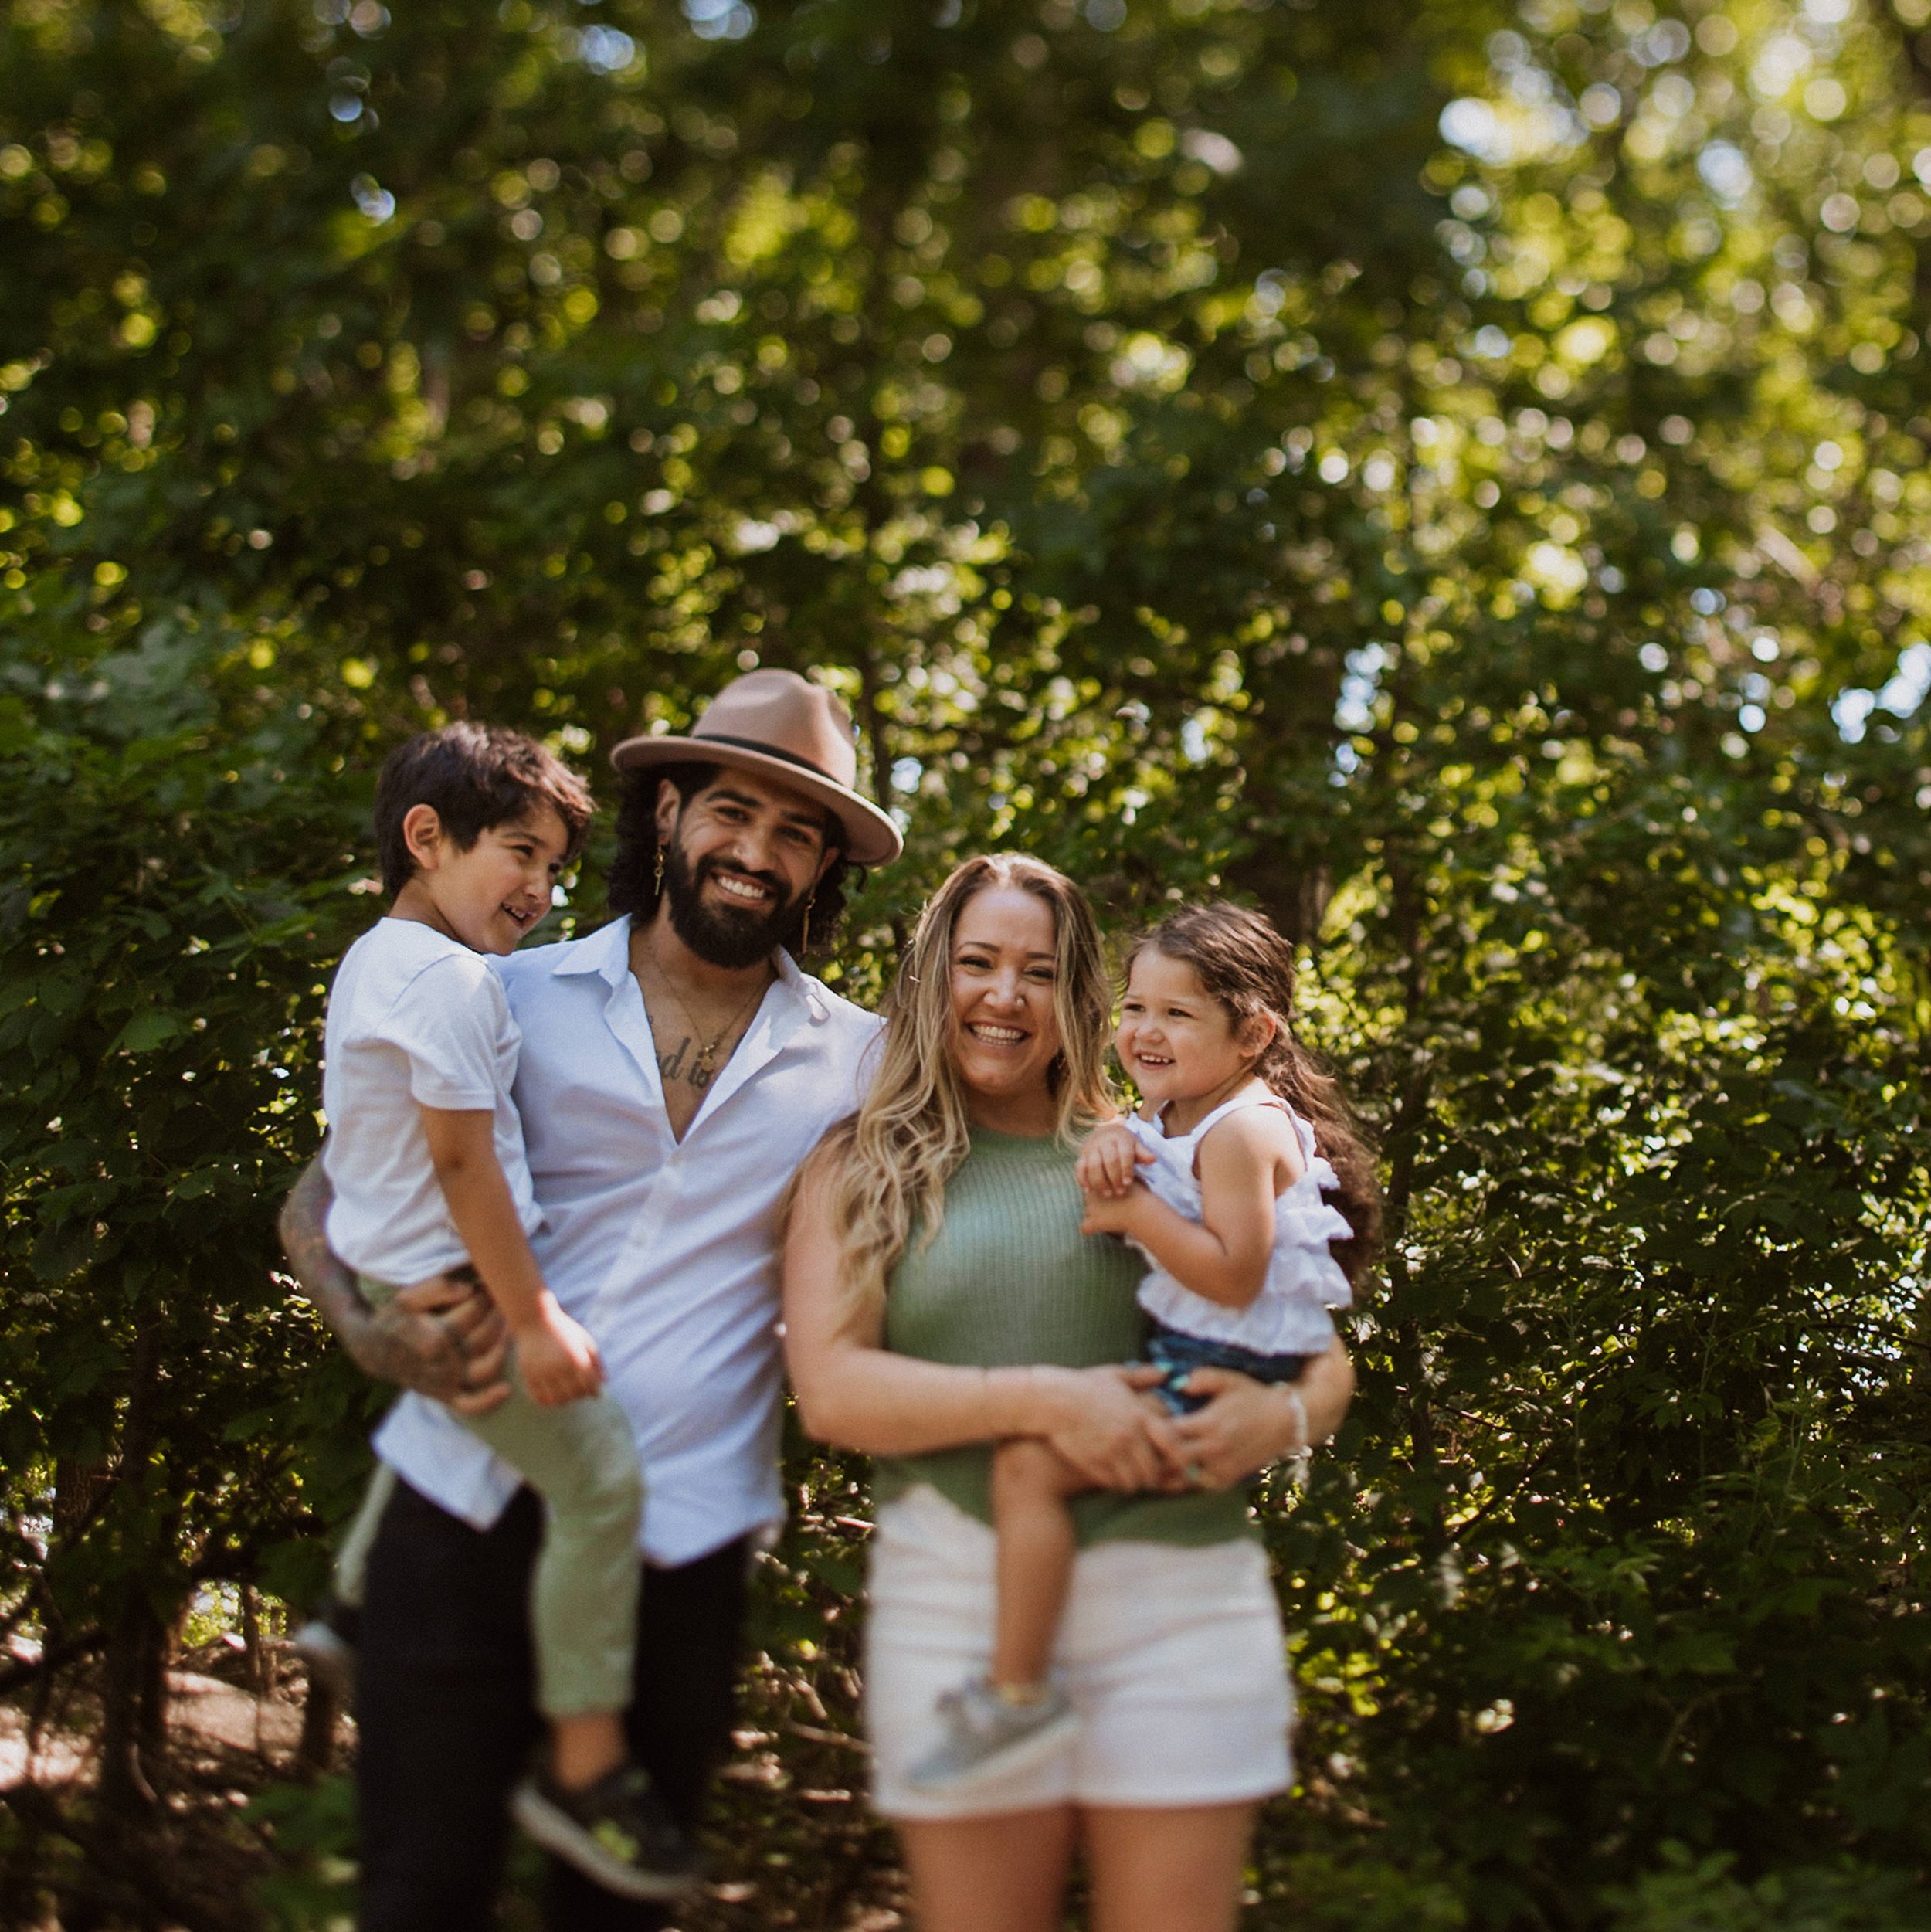 2020-Jungle-Branch-Spring-Sessions-Chicago-Asheville-Portraits-Family-Engagement-Dogs-Headshots-Newborn-Maternity-Date-Night-Food-Drinks-Actor-Portrait-12.jpg